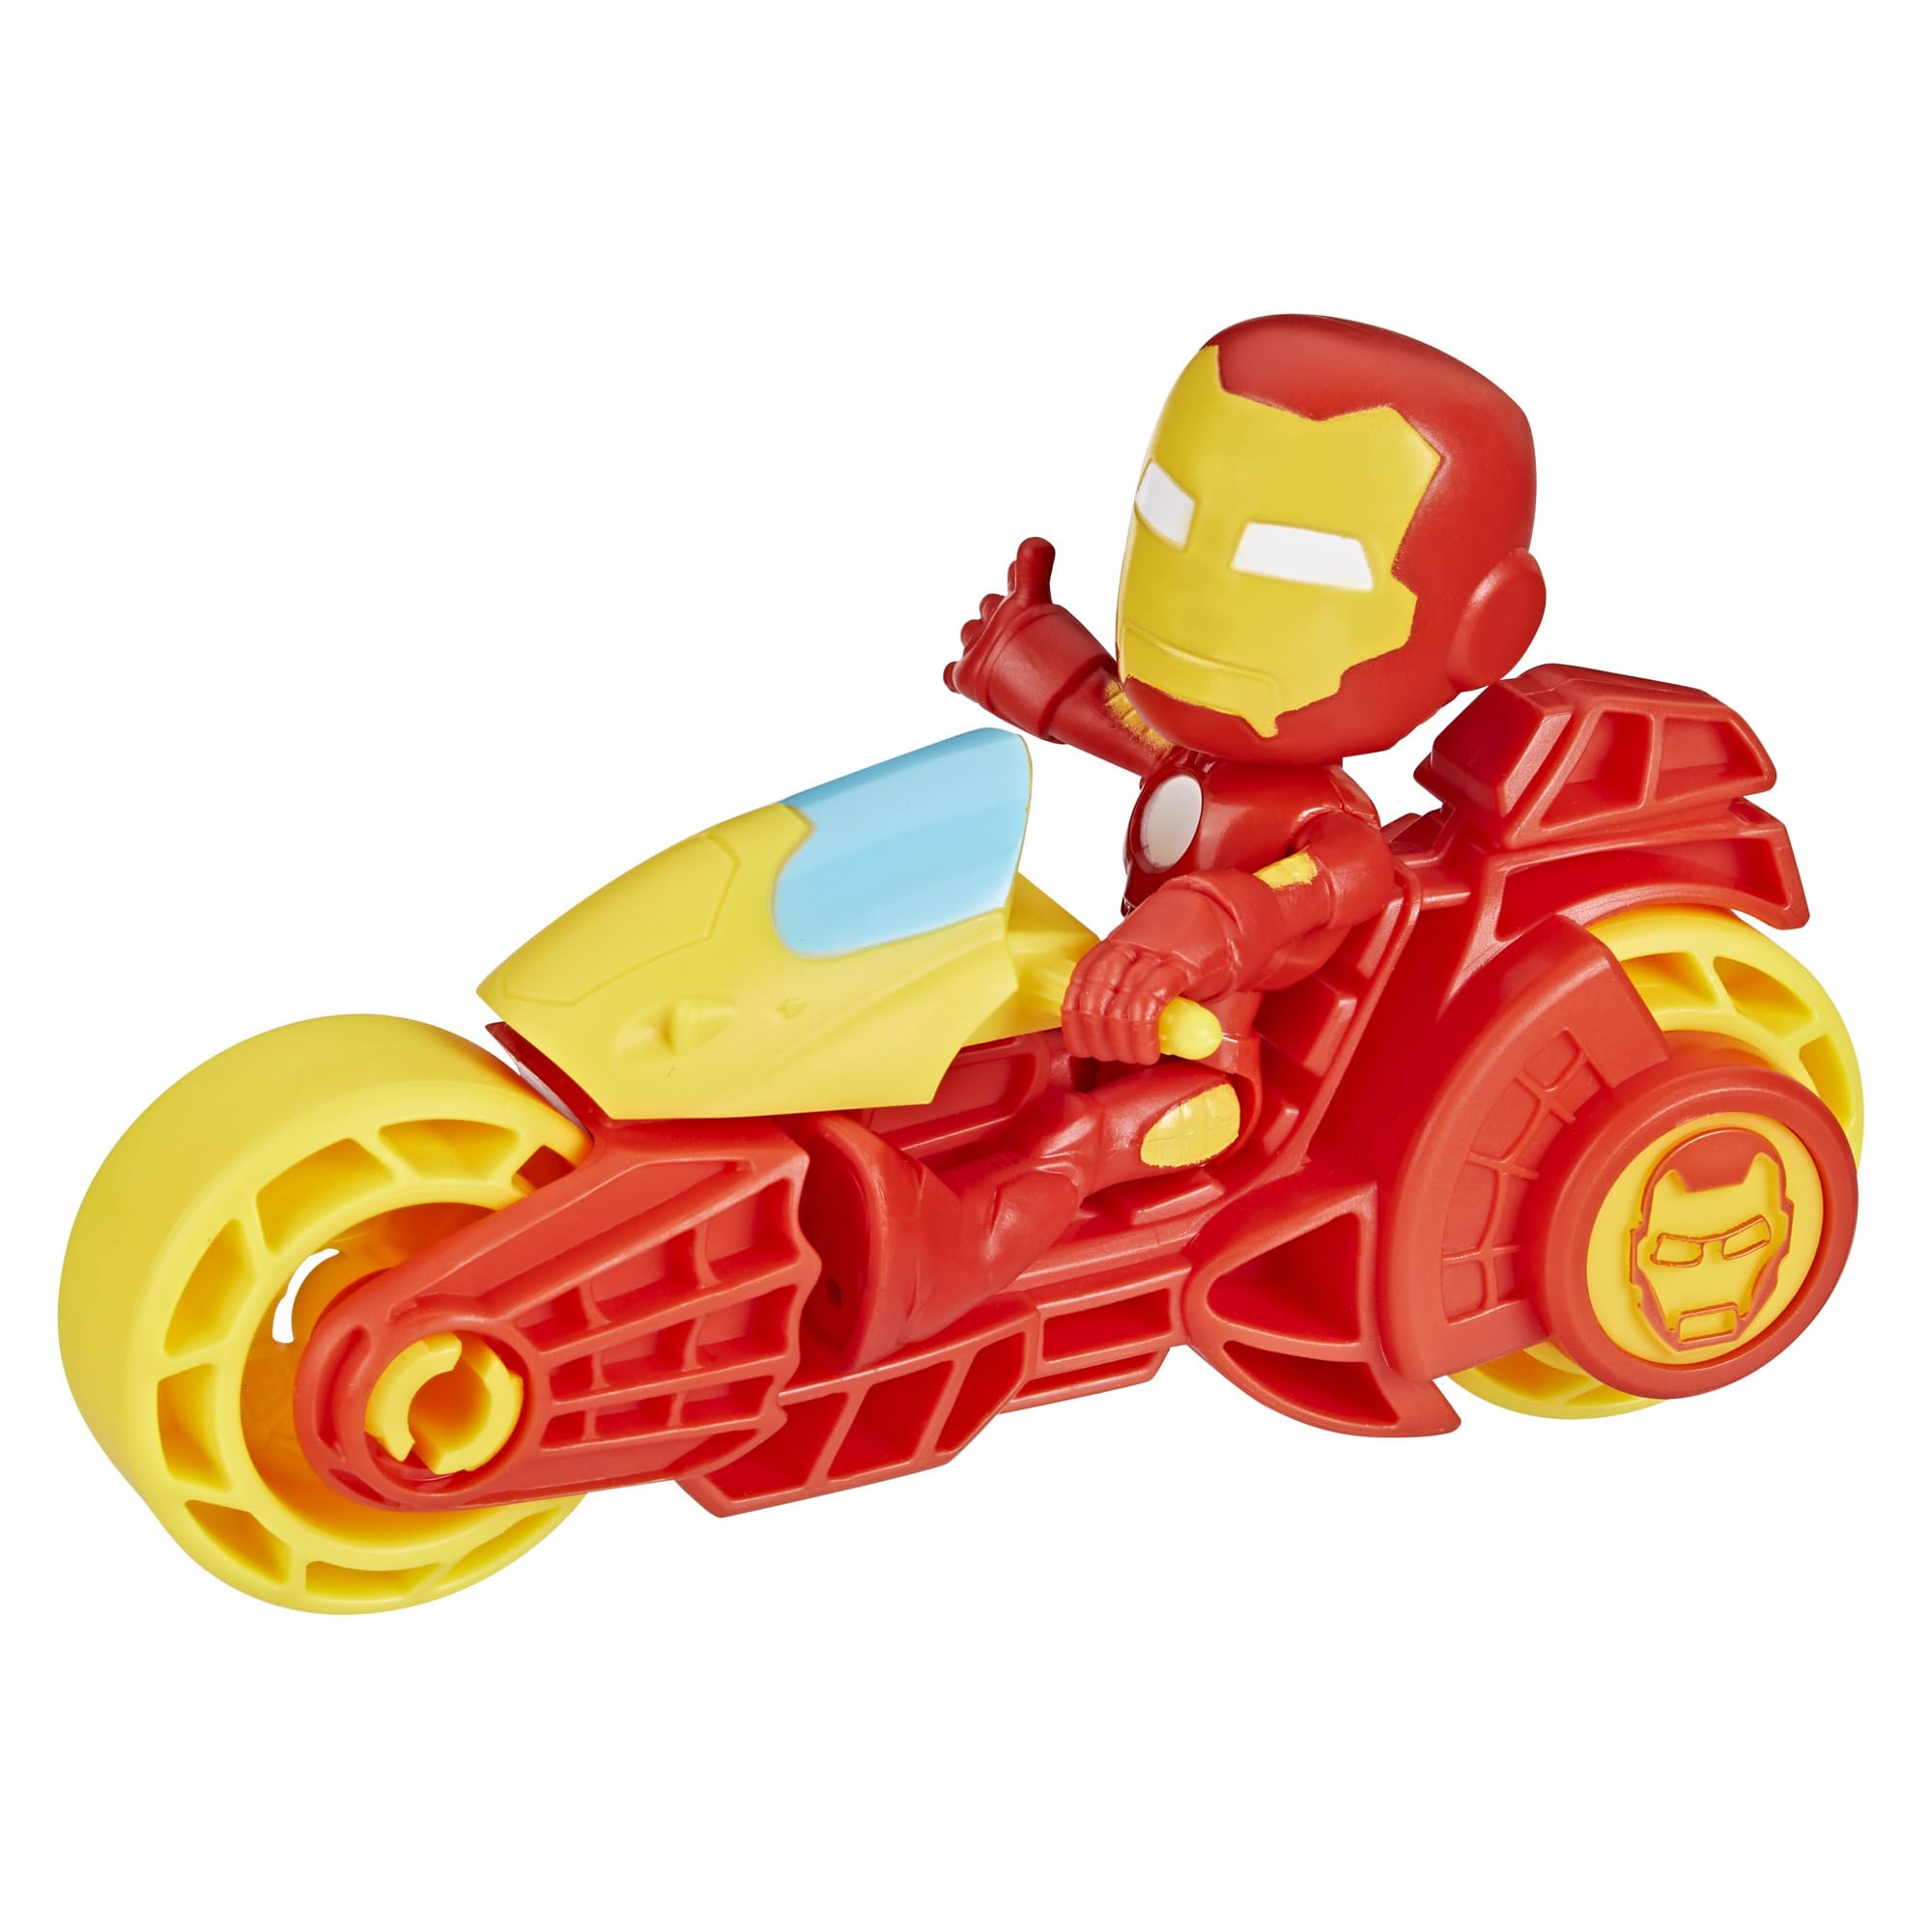 SPIDEY AND HIS AMAZING FRIENDS, Iron Man Action Figure & Toy Motorcycle Playset, Marvel Super Hero Preschool Toys for Kids 3 and Up